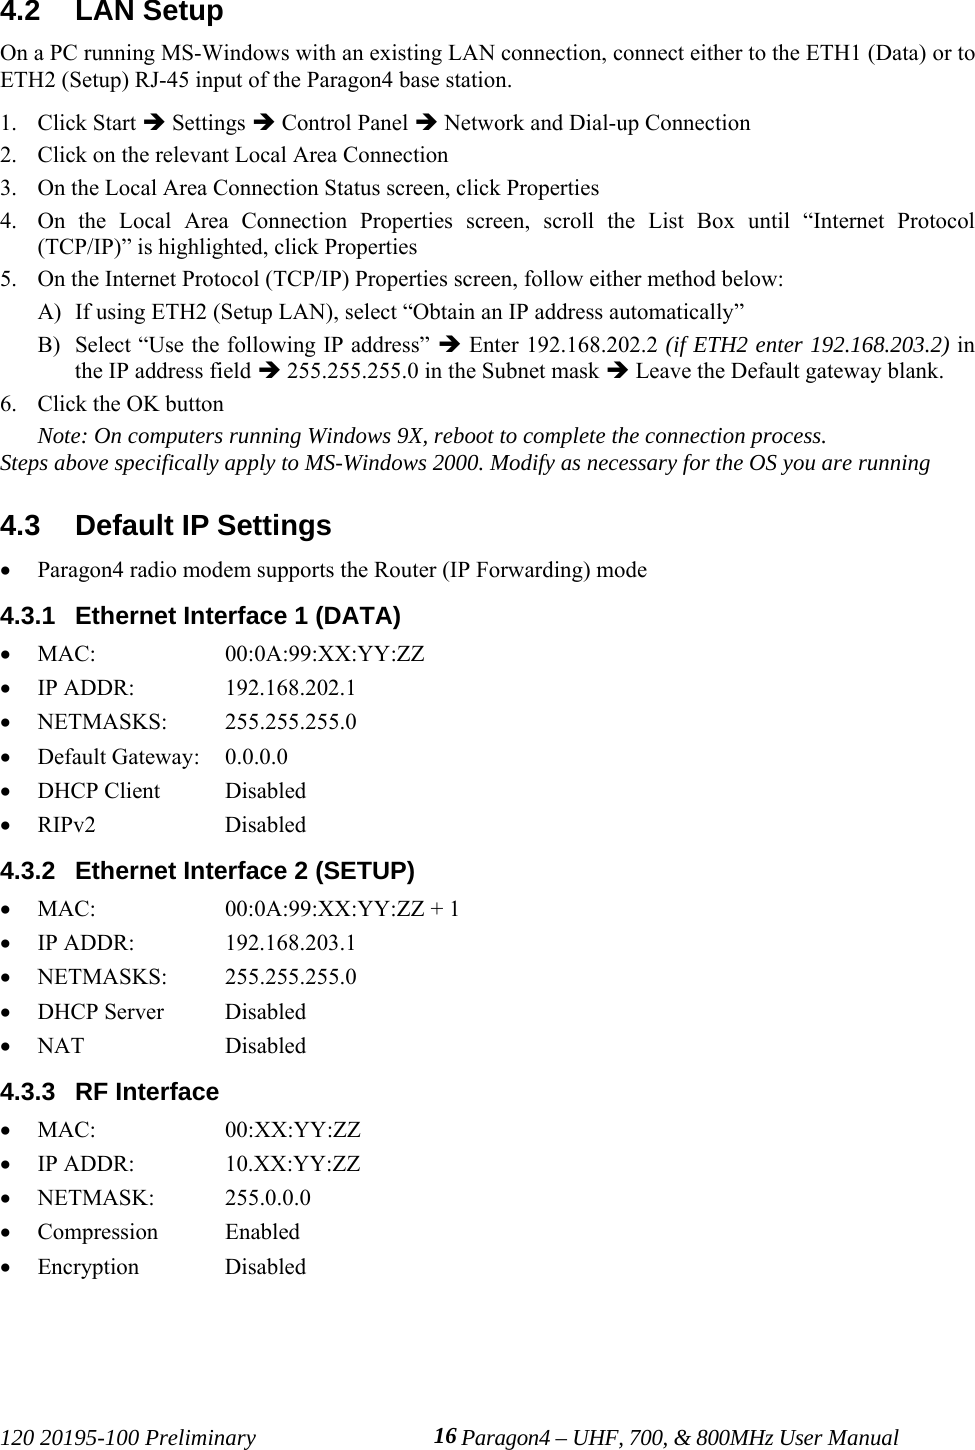 120 20195-100 Preliminary Paragon4 – UHF, 700, &amp; 800MHz User Manual164.2  LAN SetupOn a PC running MS-Windows with an existing LAN connection, connect either to the ETH1 (Data) or toETH2 (Setup) RJ-45 input of the Paragon4 base station.1. Click Start Î Settings Î Control Panel Î Network and Dial-up Connection2. Click on the relevant Local Area Connection3. On the Local Area Connection Status screen, click Properties4. On the Local Area Connection Properties screen, scroll the List Box until “Internet Protocol(TCP/IP)” is highlighted, click Properties5. On the Internet Protocol (TCP/IP) Properties screen, follow either method below:A) If using ETH2 (Setup LAN), select “Obtain an IP address automatically” B) Select “Use the following IP address” Î Enter 192.168.202.2 (if ETH2 enter 192.168.203.2) inthe IP address field Î 255.255.255.0 in the Subnet mask Î Leave the Default gateway blank.6. Click the OK buttonNote: On computers running Windows 9X, reboot to complete the connection process.Steps above specifically apply to MS-Windows 2000. Modify as necessary for the OS you are running4.3  Default IP Settings• Paragon4 radio modem supports the Router (IP Forwarding) mode4.3.1  Ethernet Interface 1 (DATA)• MAC: 00:0A:99:XX:YY:ZZ• IP ADDR:  192.168.202.1• NETMASKS: 255.255.255.0• Default Gateway:  0.0.0.0• DHCP Client Disabled• RIPv2 Disabled4.3.2  Ethernet Interface 2 (SETUP)• MAC:  00:0A:99:XX:YY:ZZ + 1• IP ADDR:  192.168.203.1• NETMASKS: 255.255.255.0• DHCP Server Disabled• NAT Disabled4.3.3  RF Interface• MAC: 00:XX:YY:ZZ• IP ADDR:  10.XX:YY:ZZ• NETMASK: 255.0.0.0• Compression Enabled• Encryption Disabled